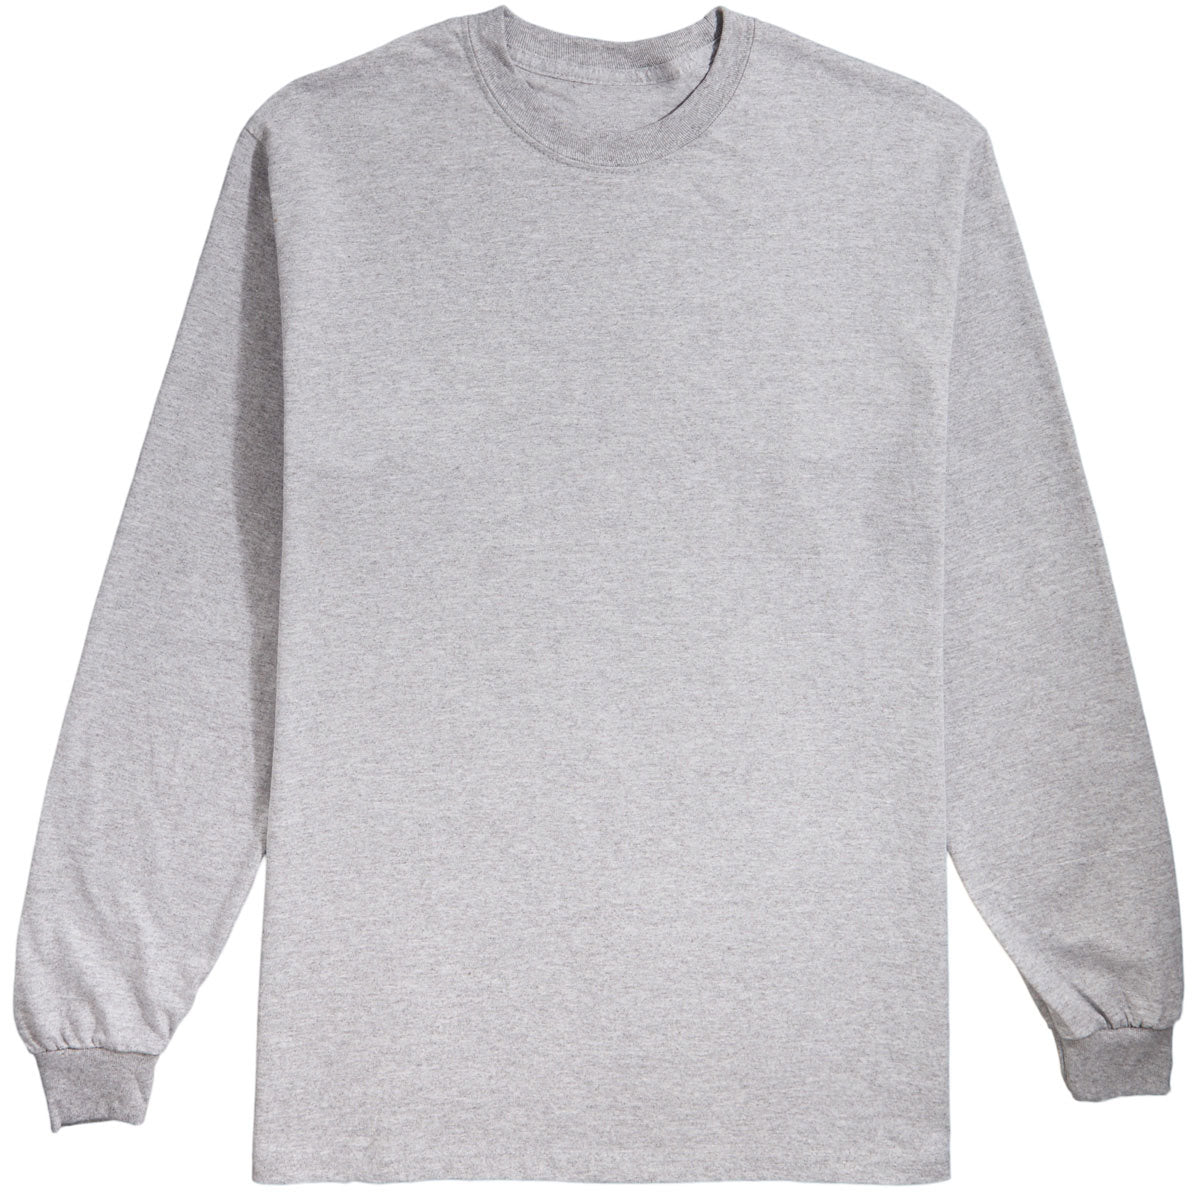 Converse Mouse Long Sleeve T-Shirt - Heather Grey - MD image 1